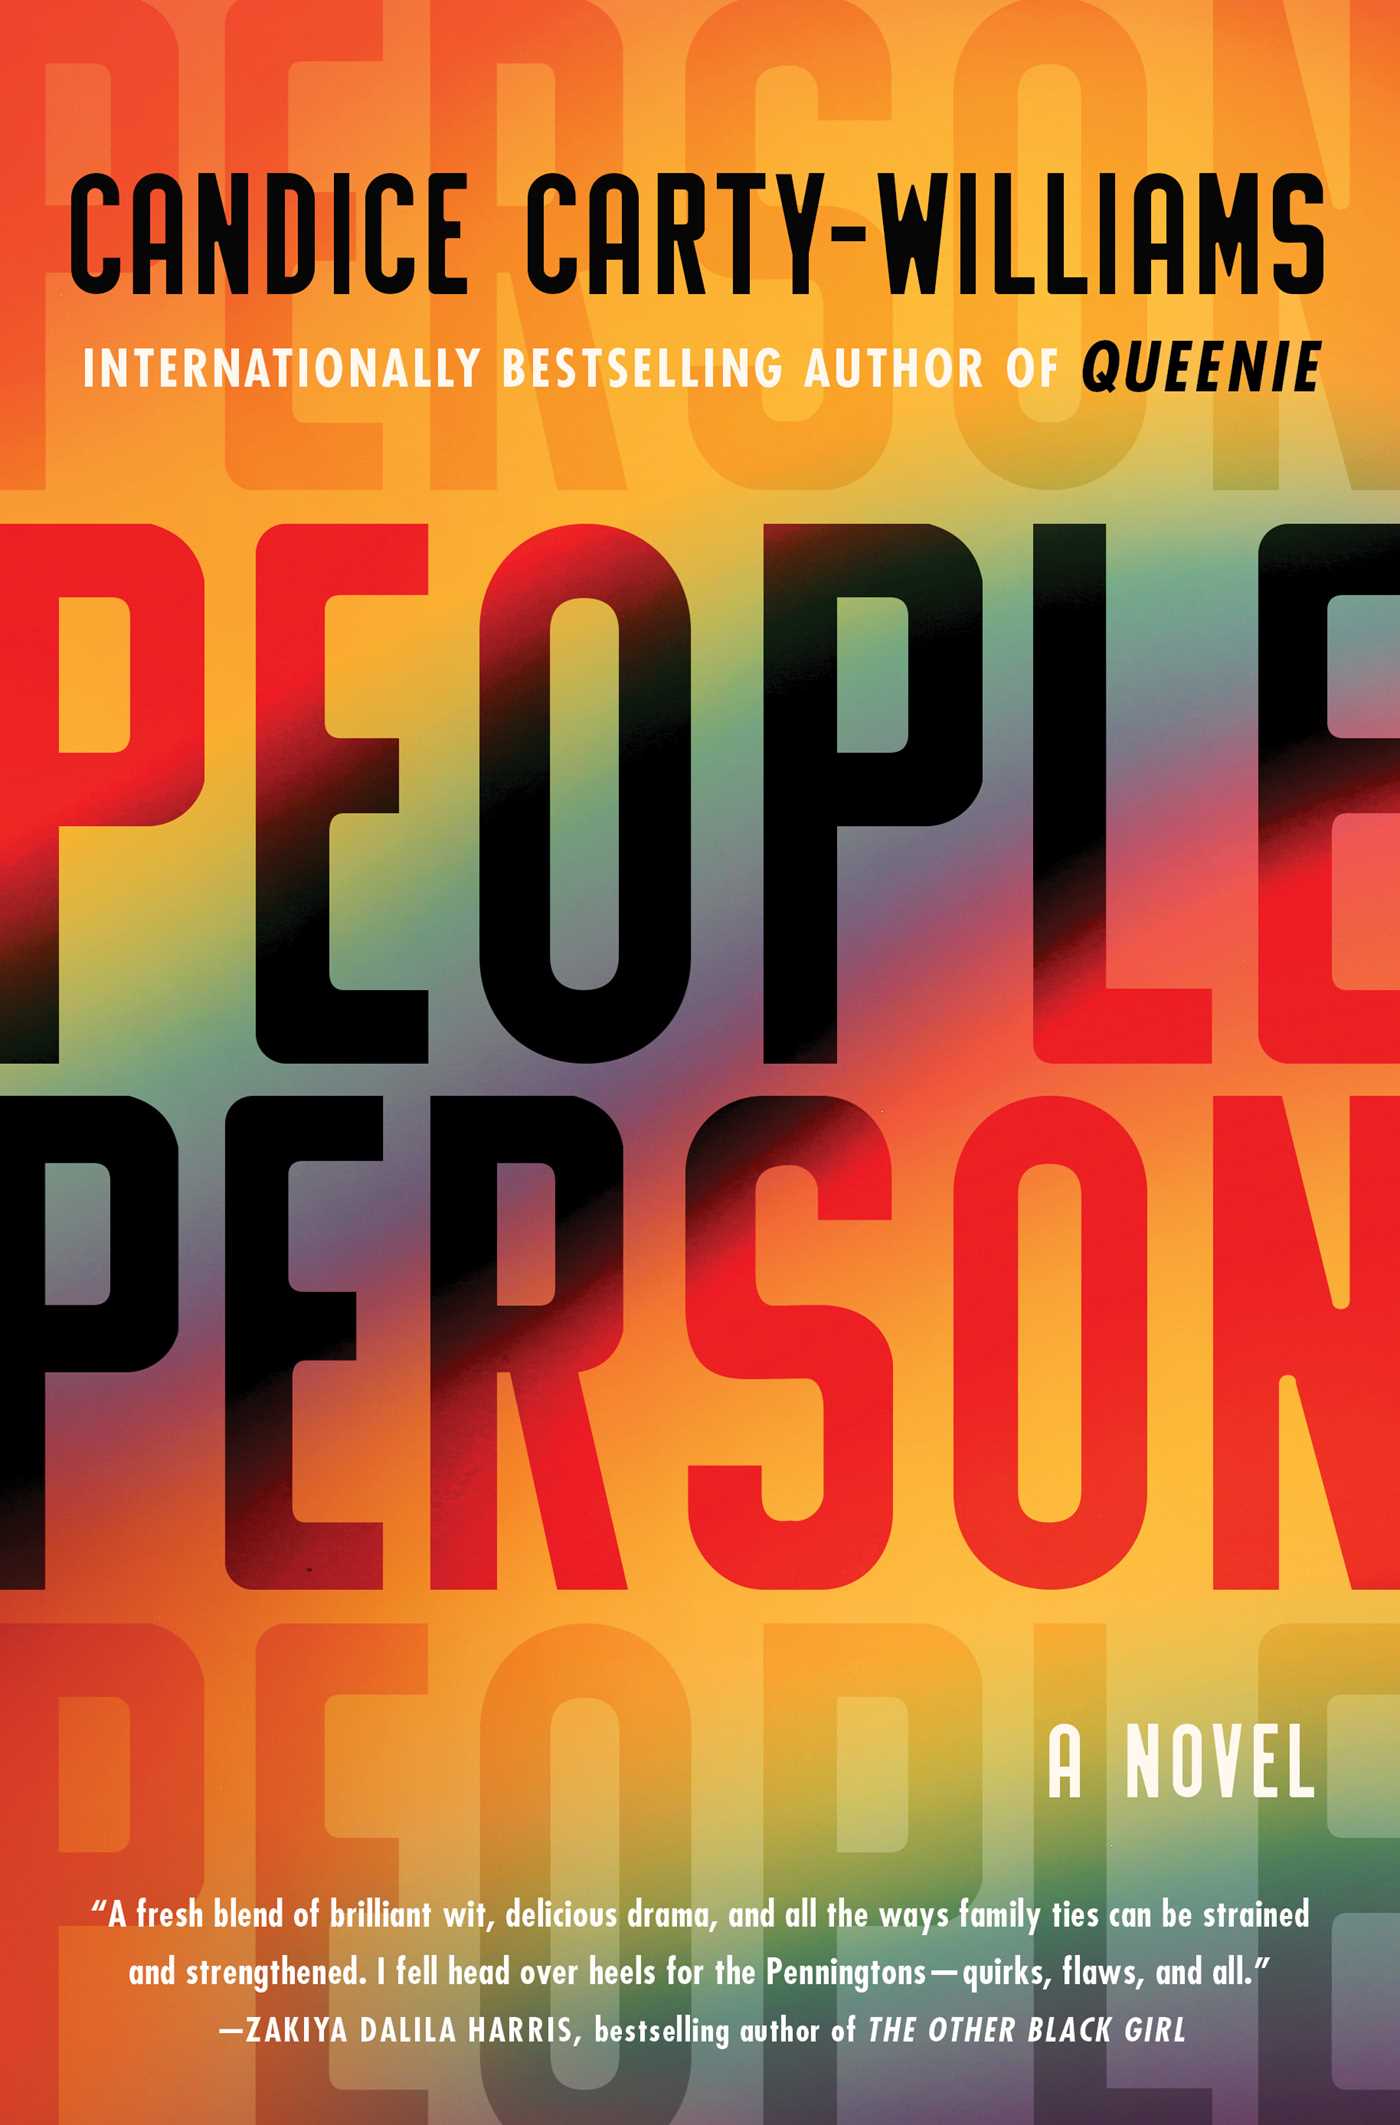 People Person by Candice Carty-Williams book cover